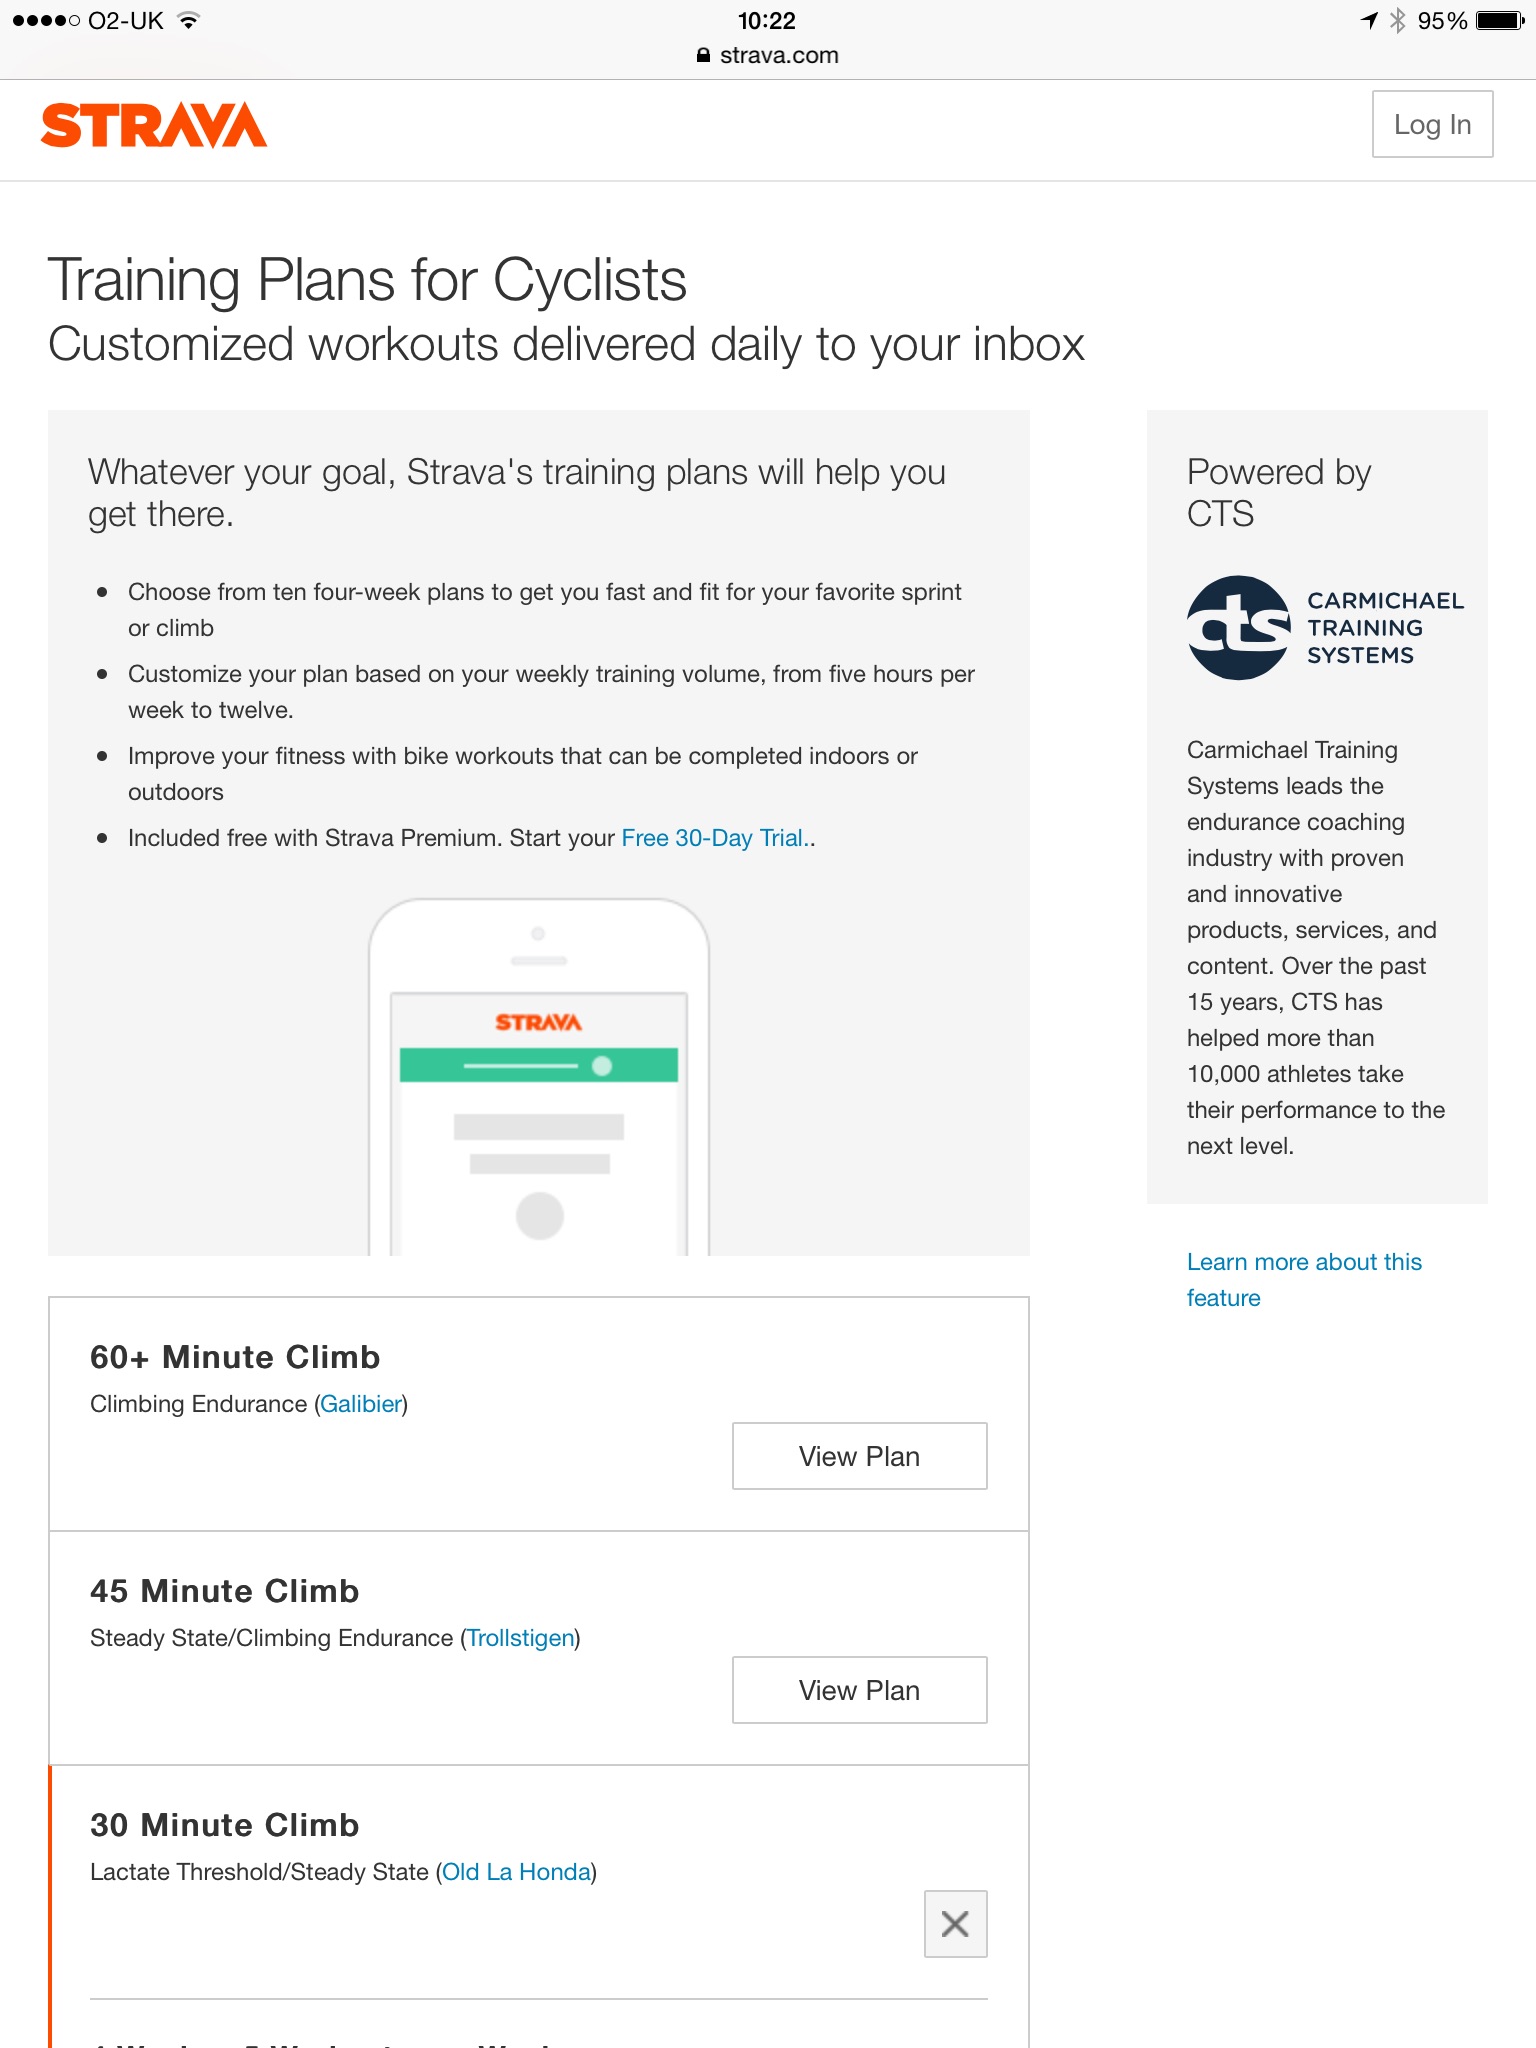 Strava And Athlete Training Plans Bdocs Rambling intended for Cycling Training Plan Strava